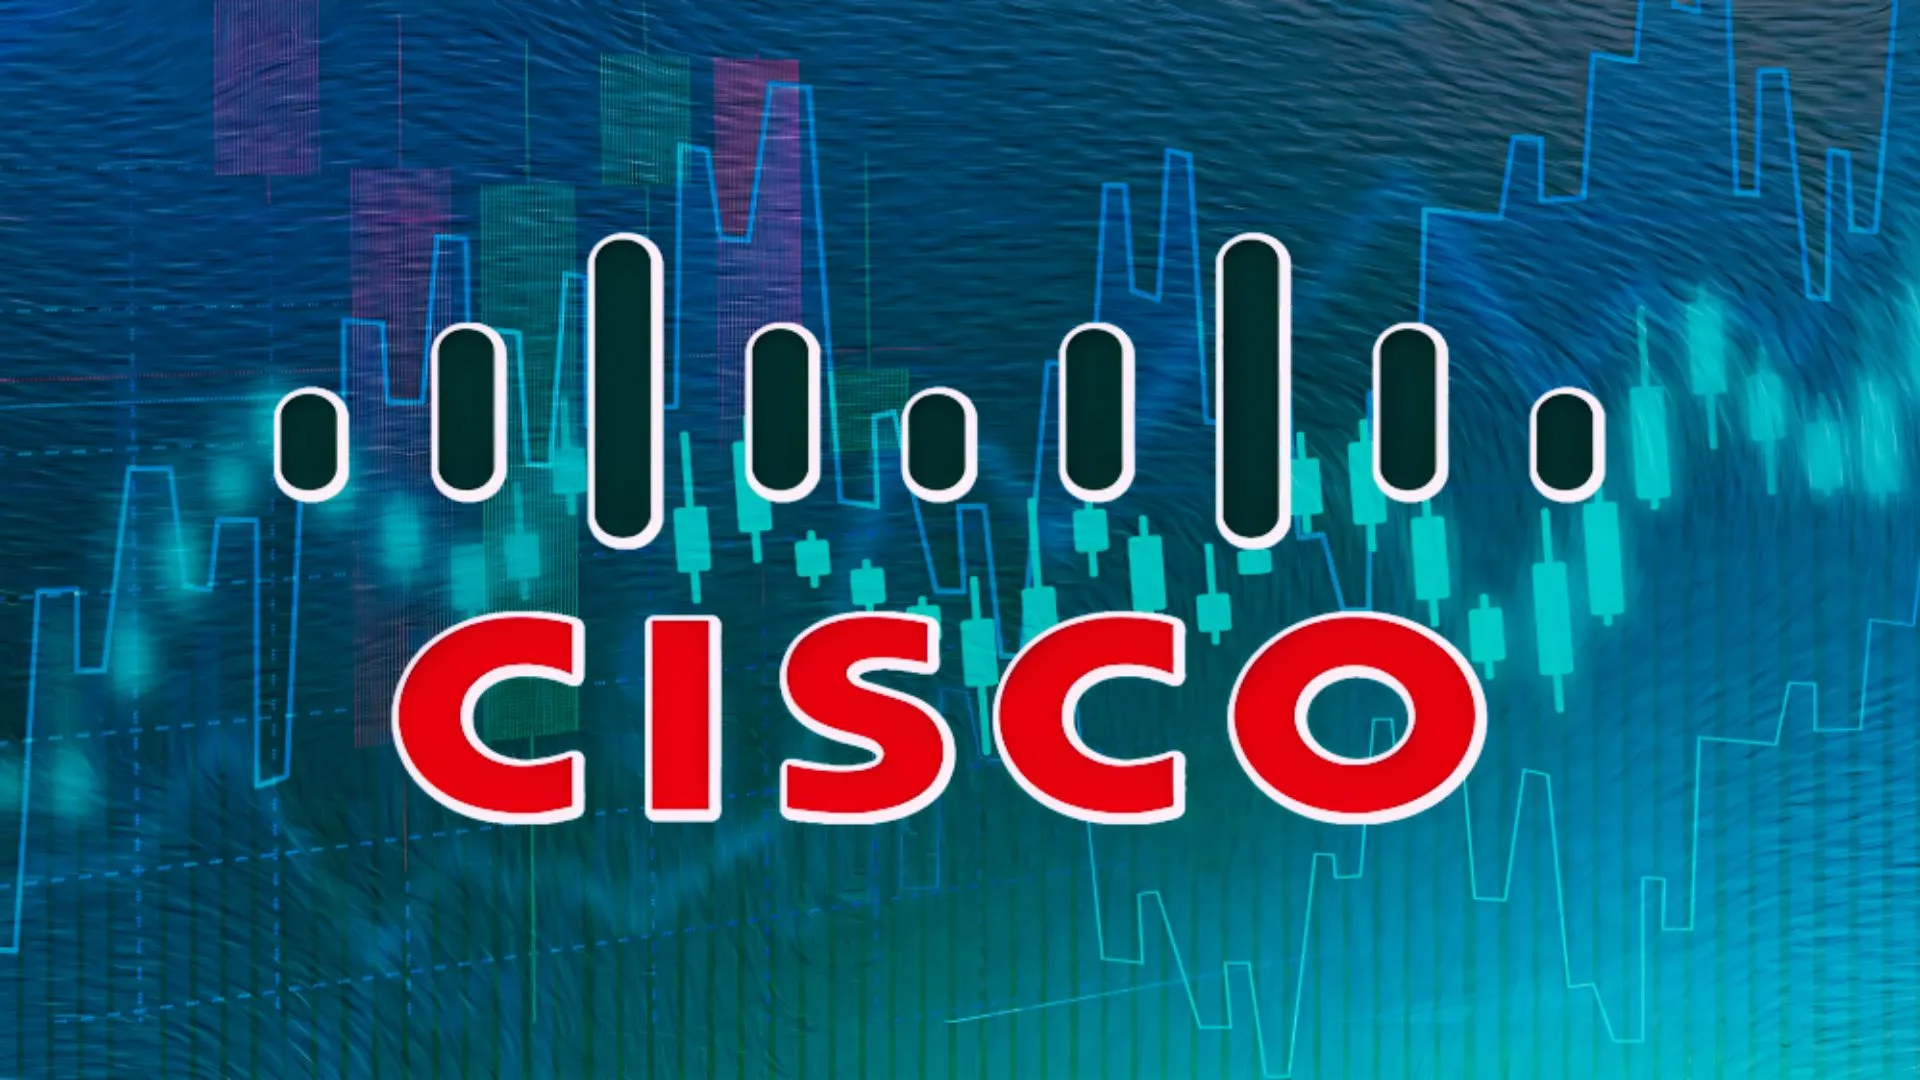 Cisco Systems Inc.: Will CSCO stock price form new all-time high?